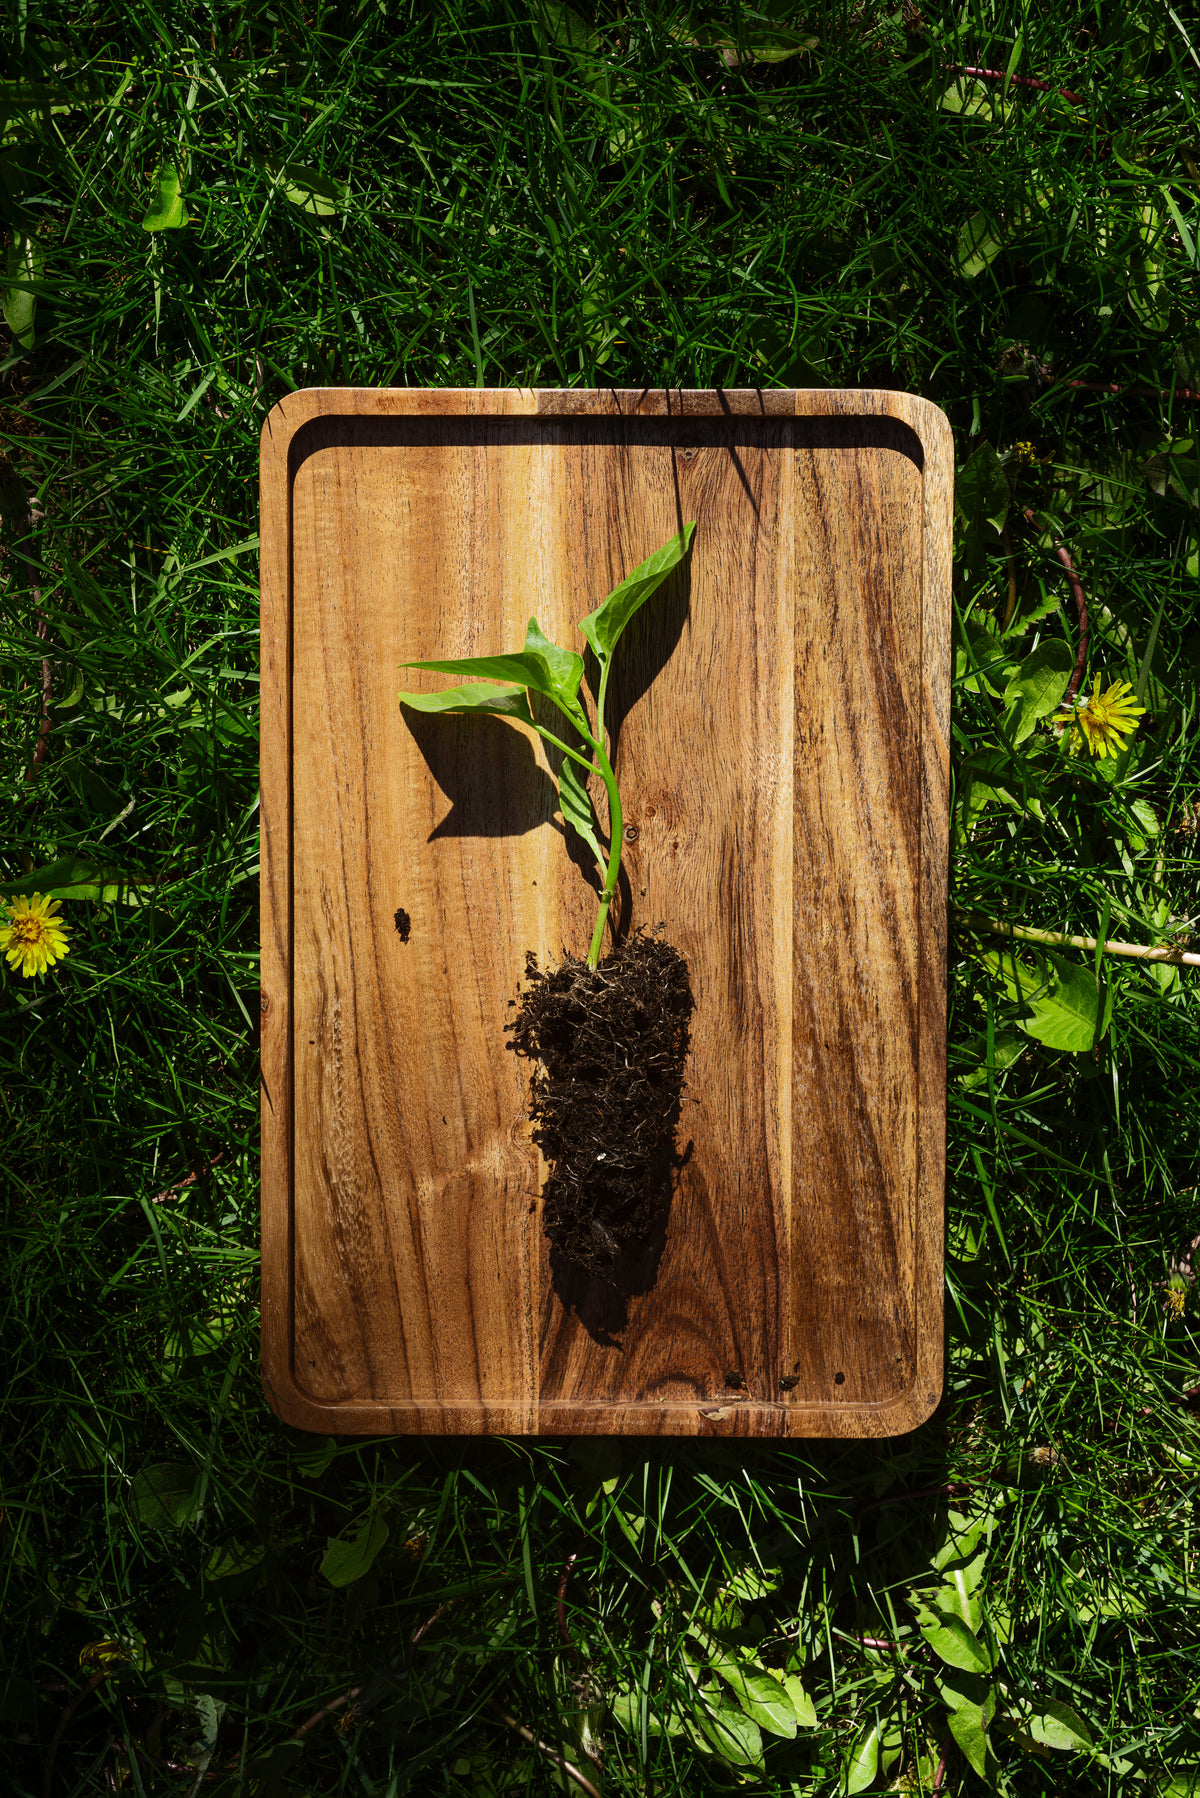 young plant on a wooden tray in the grass